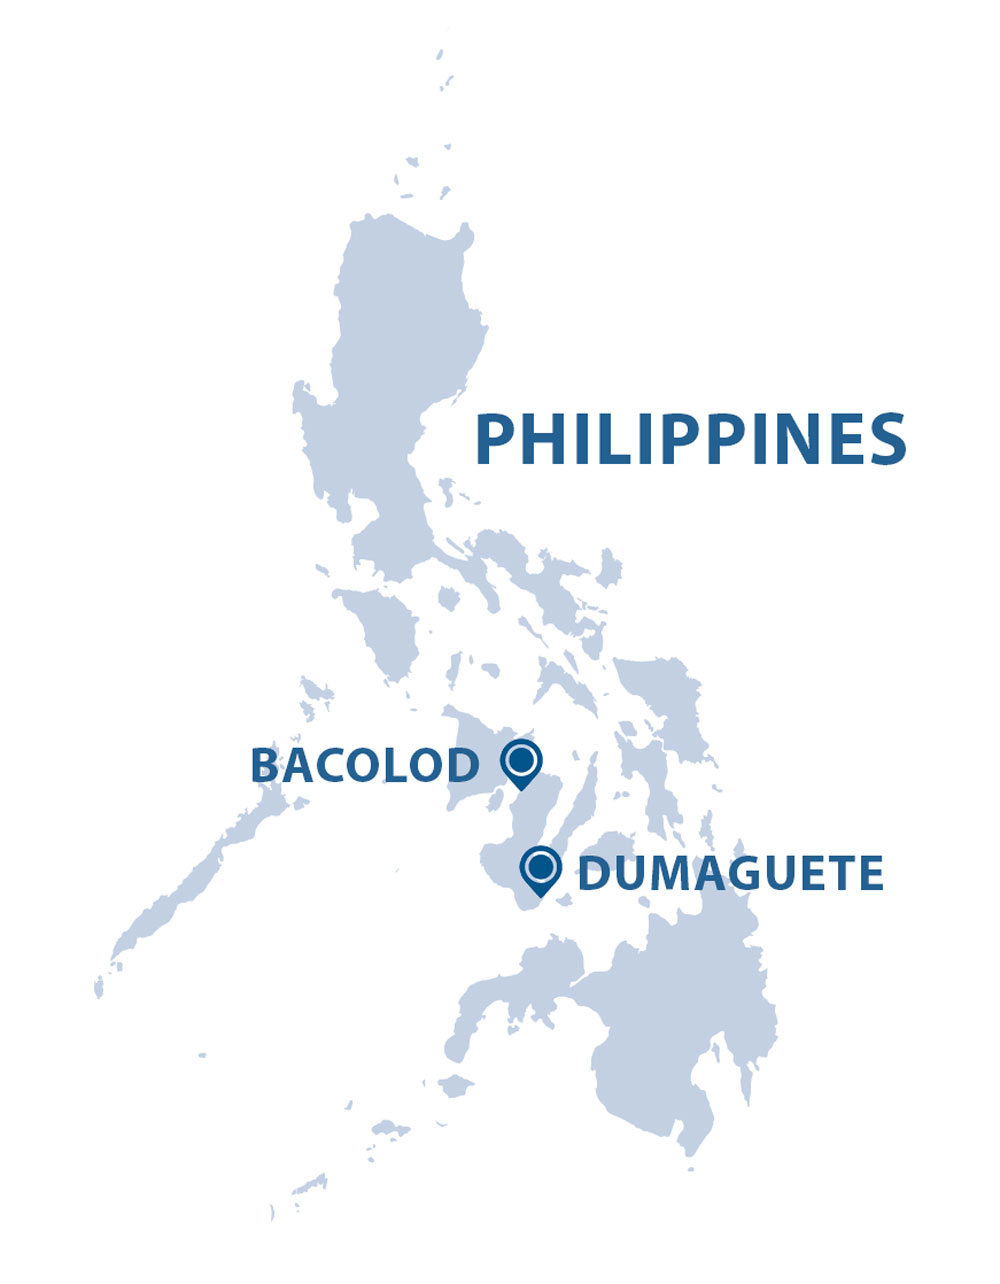 Map of the Philippines with the cities of Bacolod and Dumaguete marked